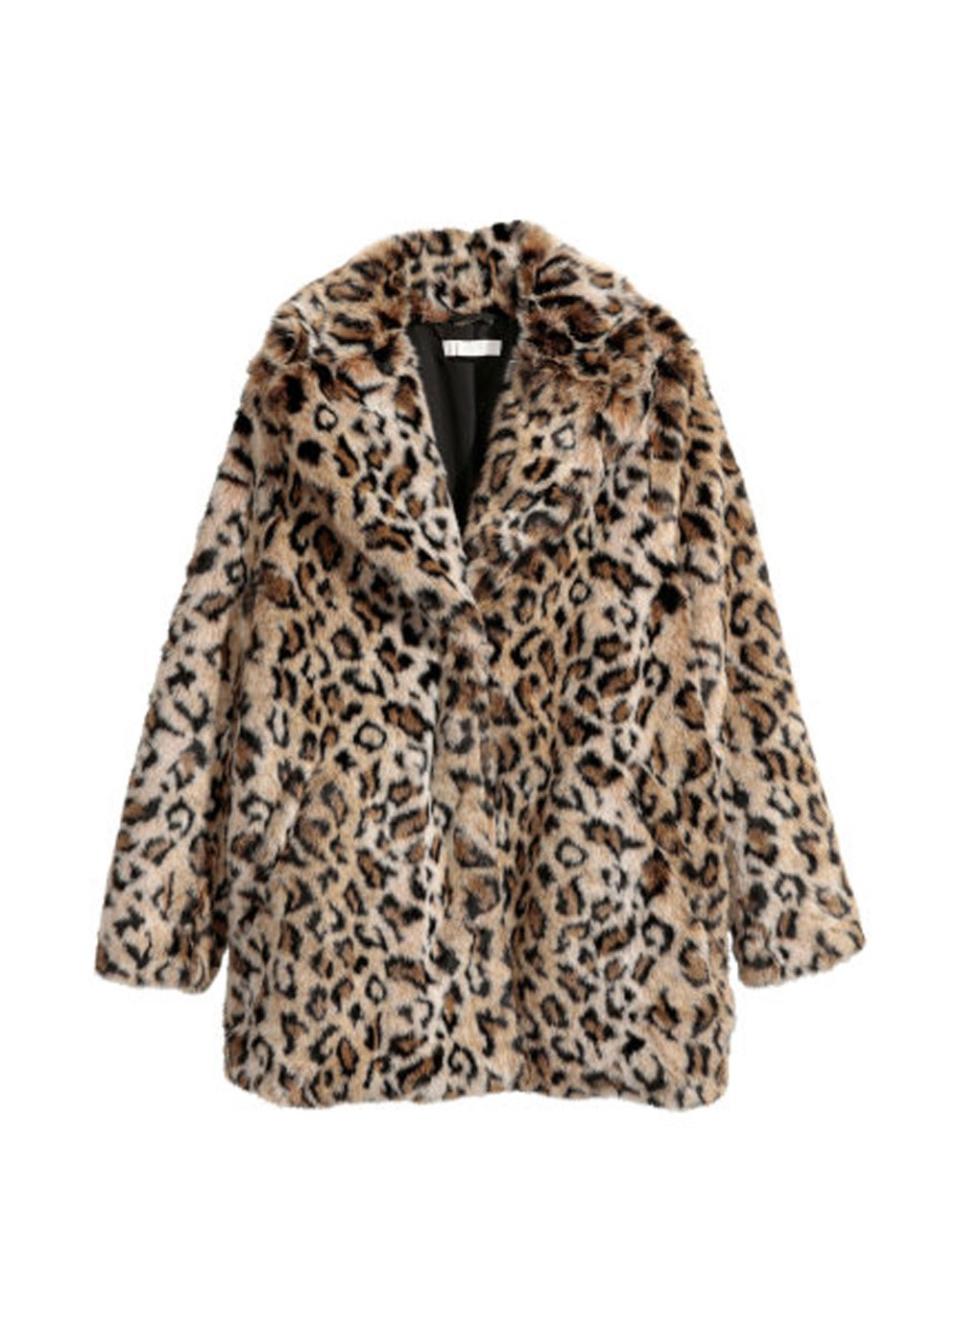 Fresh Ways to Wear Leopard Print This Fall: Coats